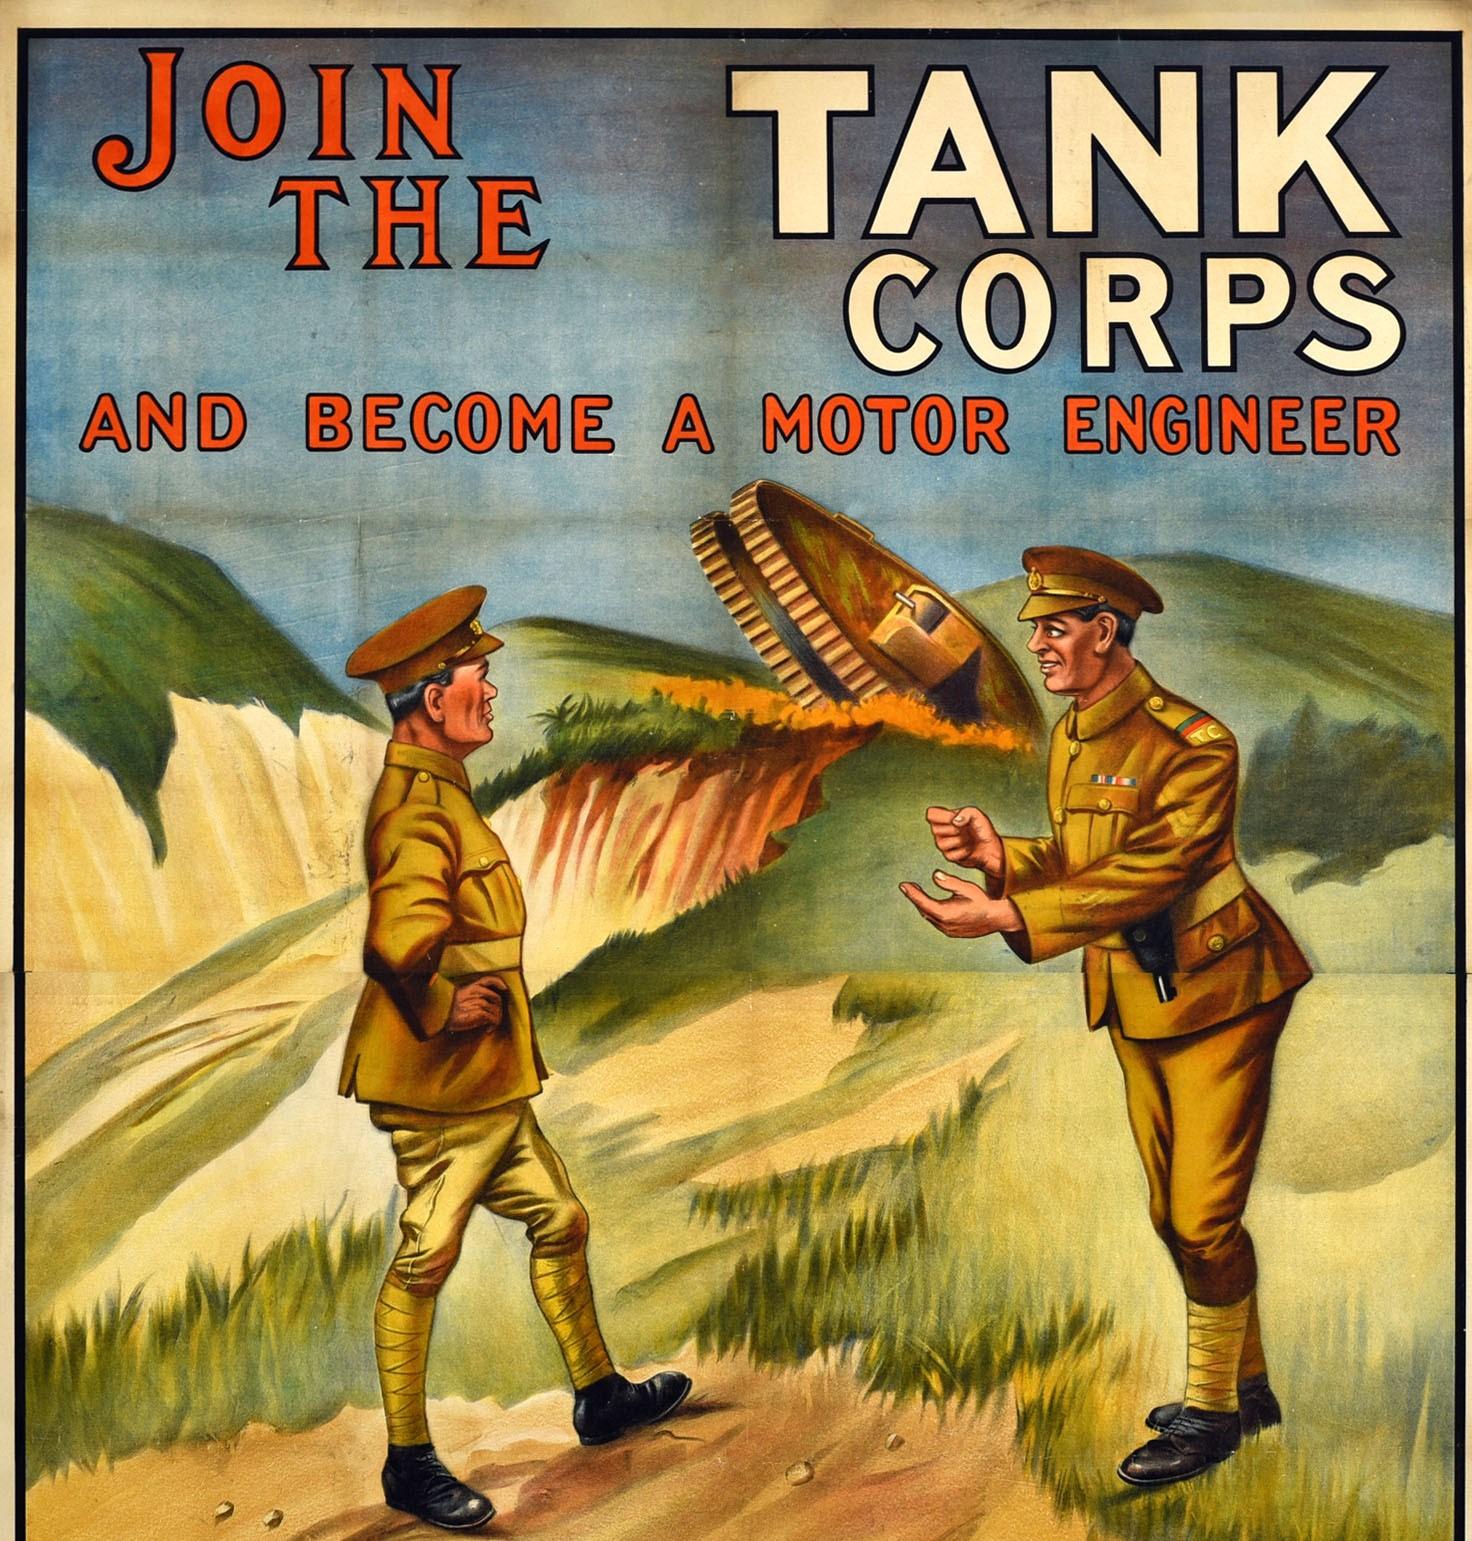 Rare original antique British recruitment poster - Join the Tank Corps and become a motor engineer - featuring a great illustration of two soldiers having a conversation on a sandy Hillside with a tank coming over the grass topped sand dune in the